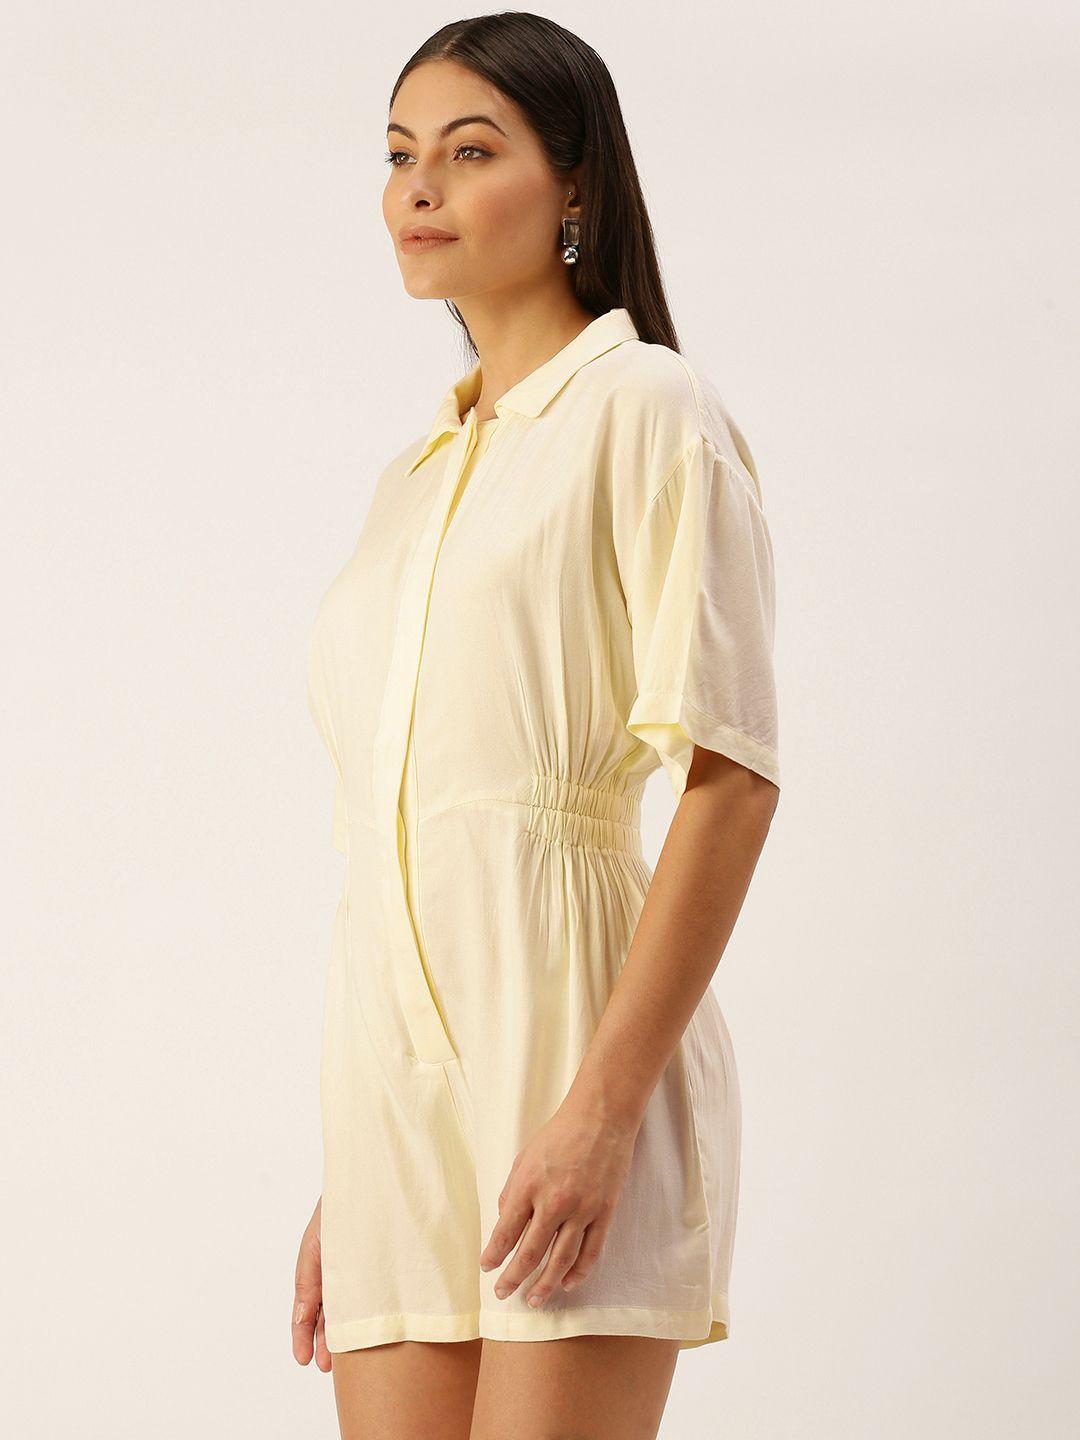 forever-21-women-cream-coloured-solid-shirt-collar-playsuit